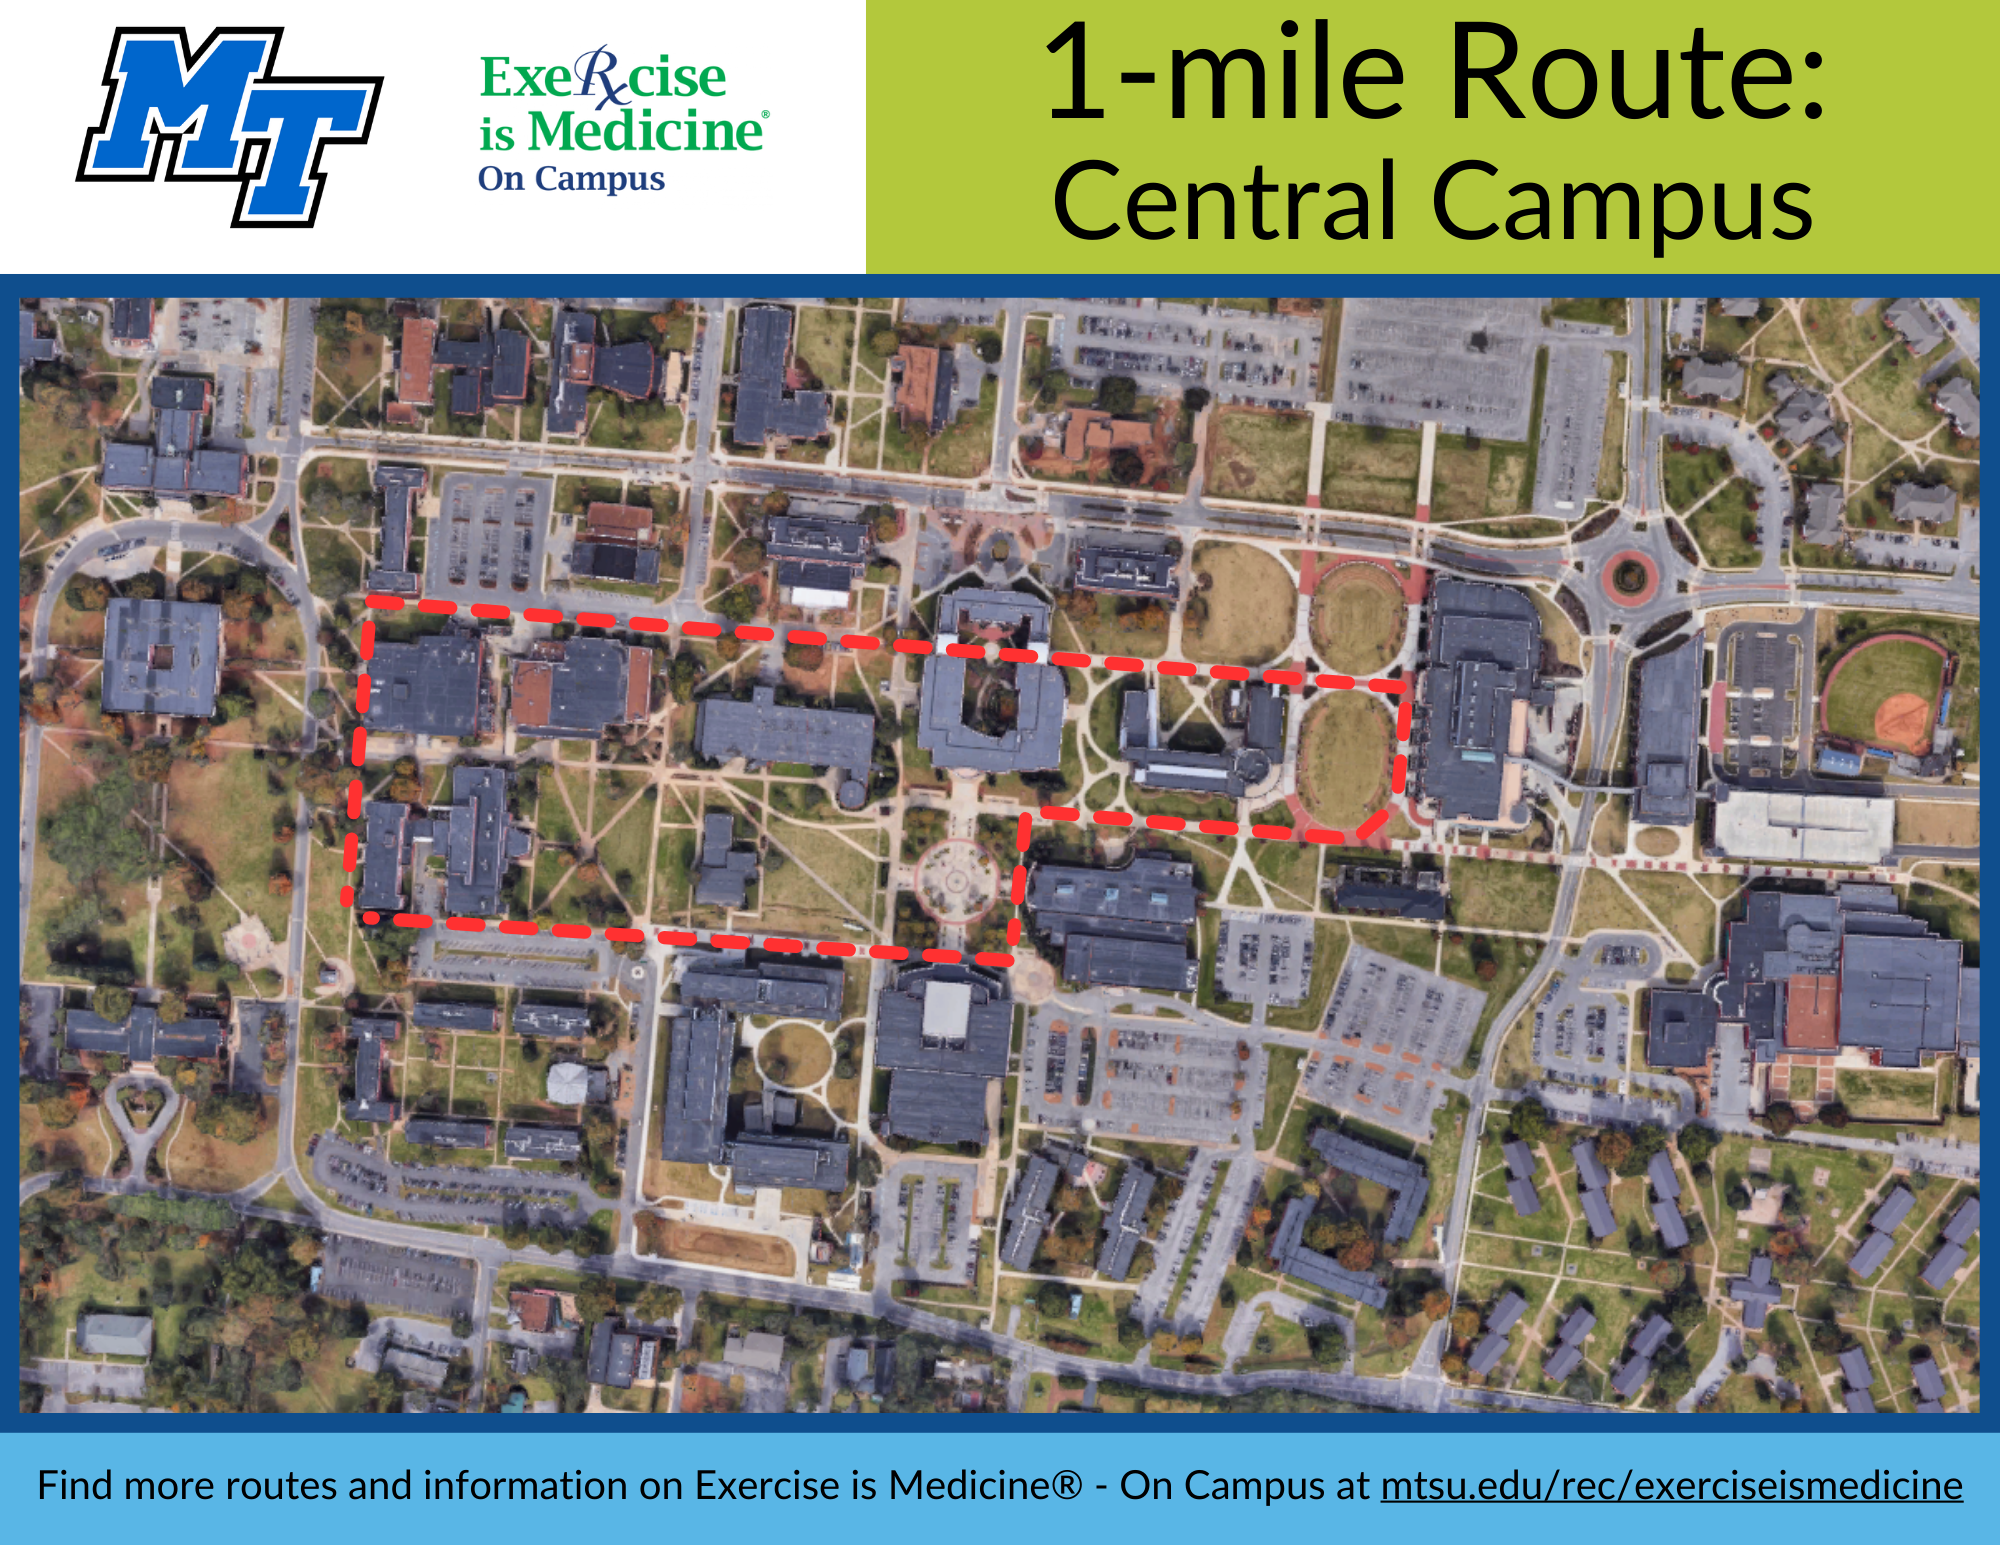 map of a 1-mile path around central campus, text directions included above